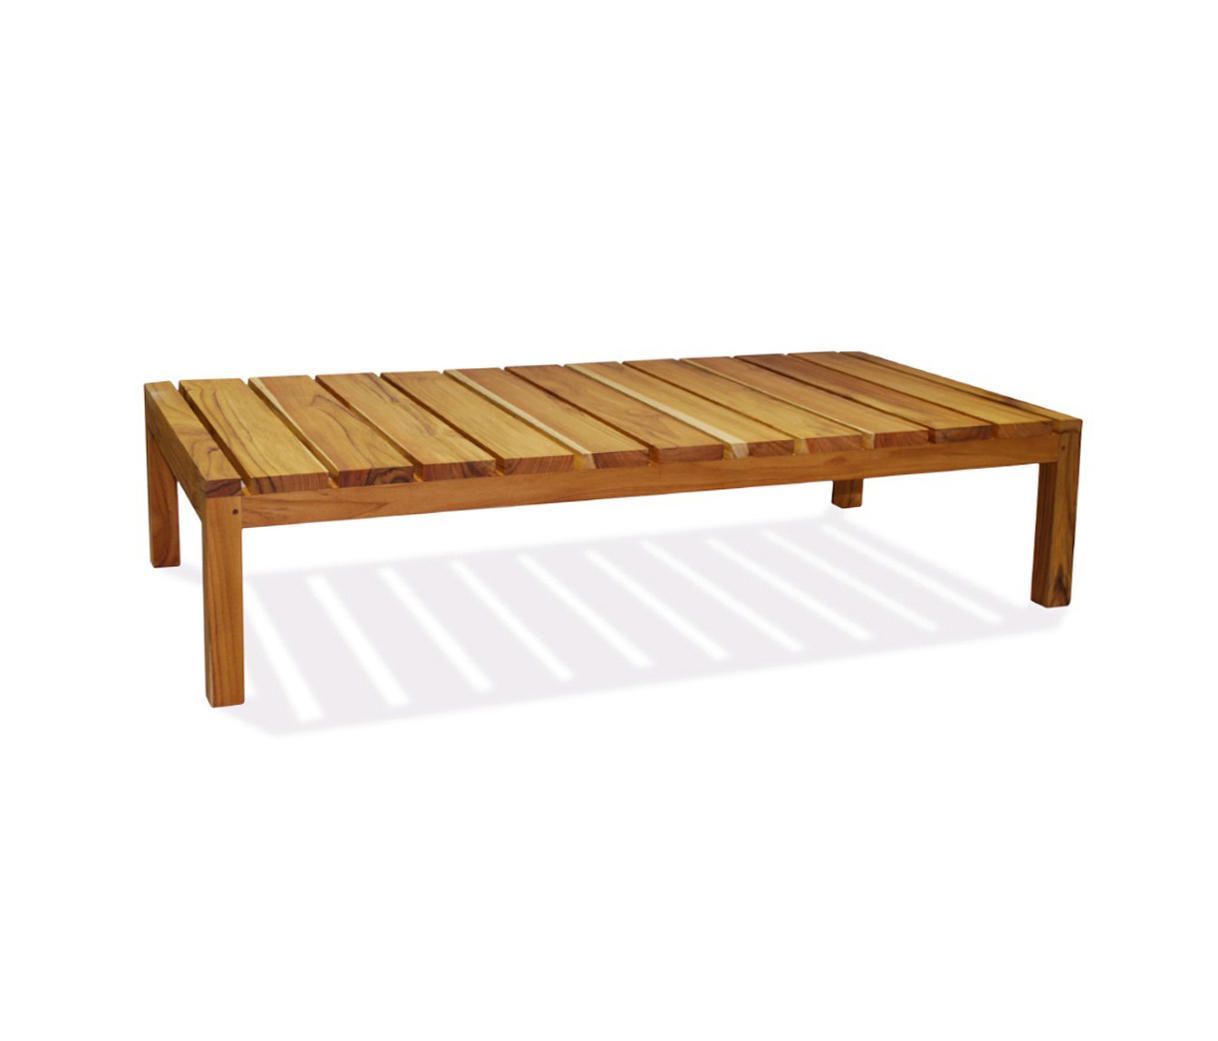 Cali Coffee Table & Designer Furniture | Architonic Within Coffee Tables For 4 6 People (View 20 of 20)